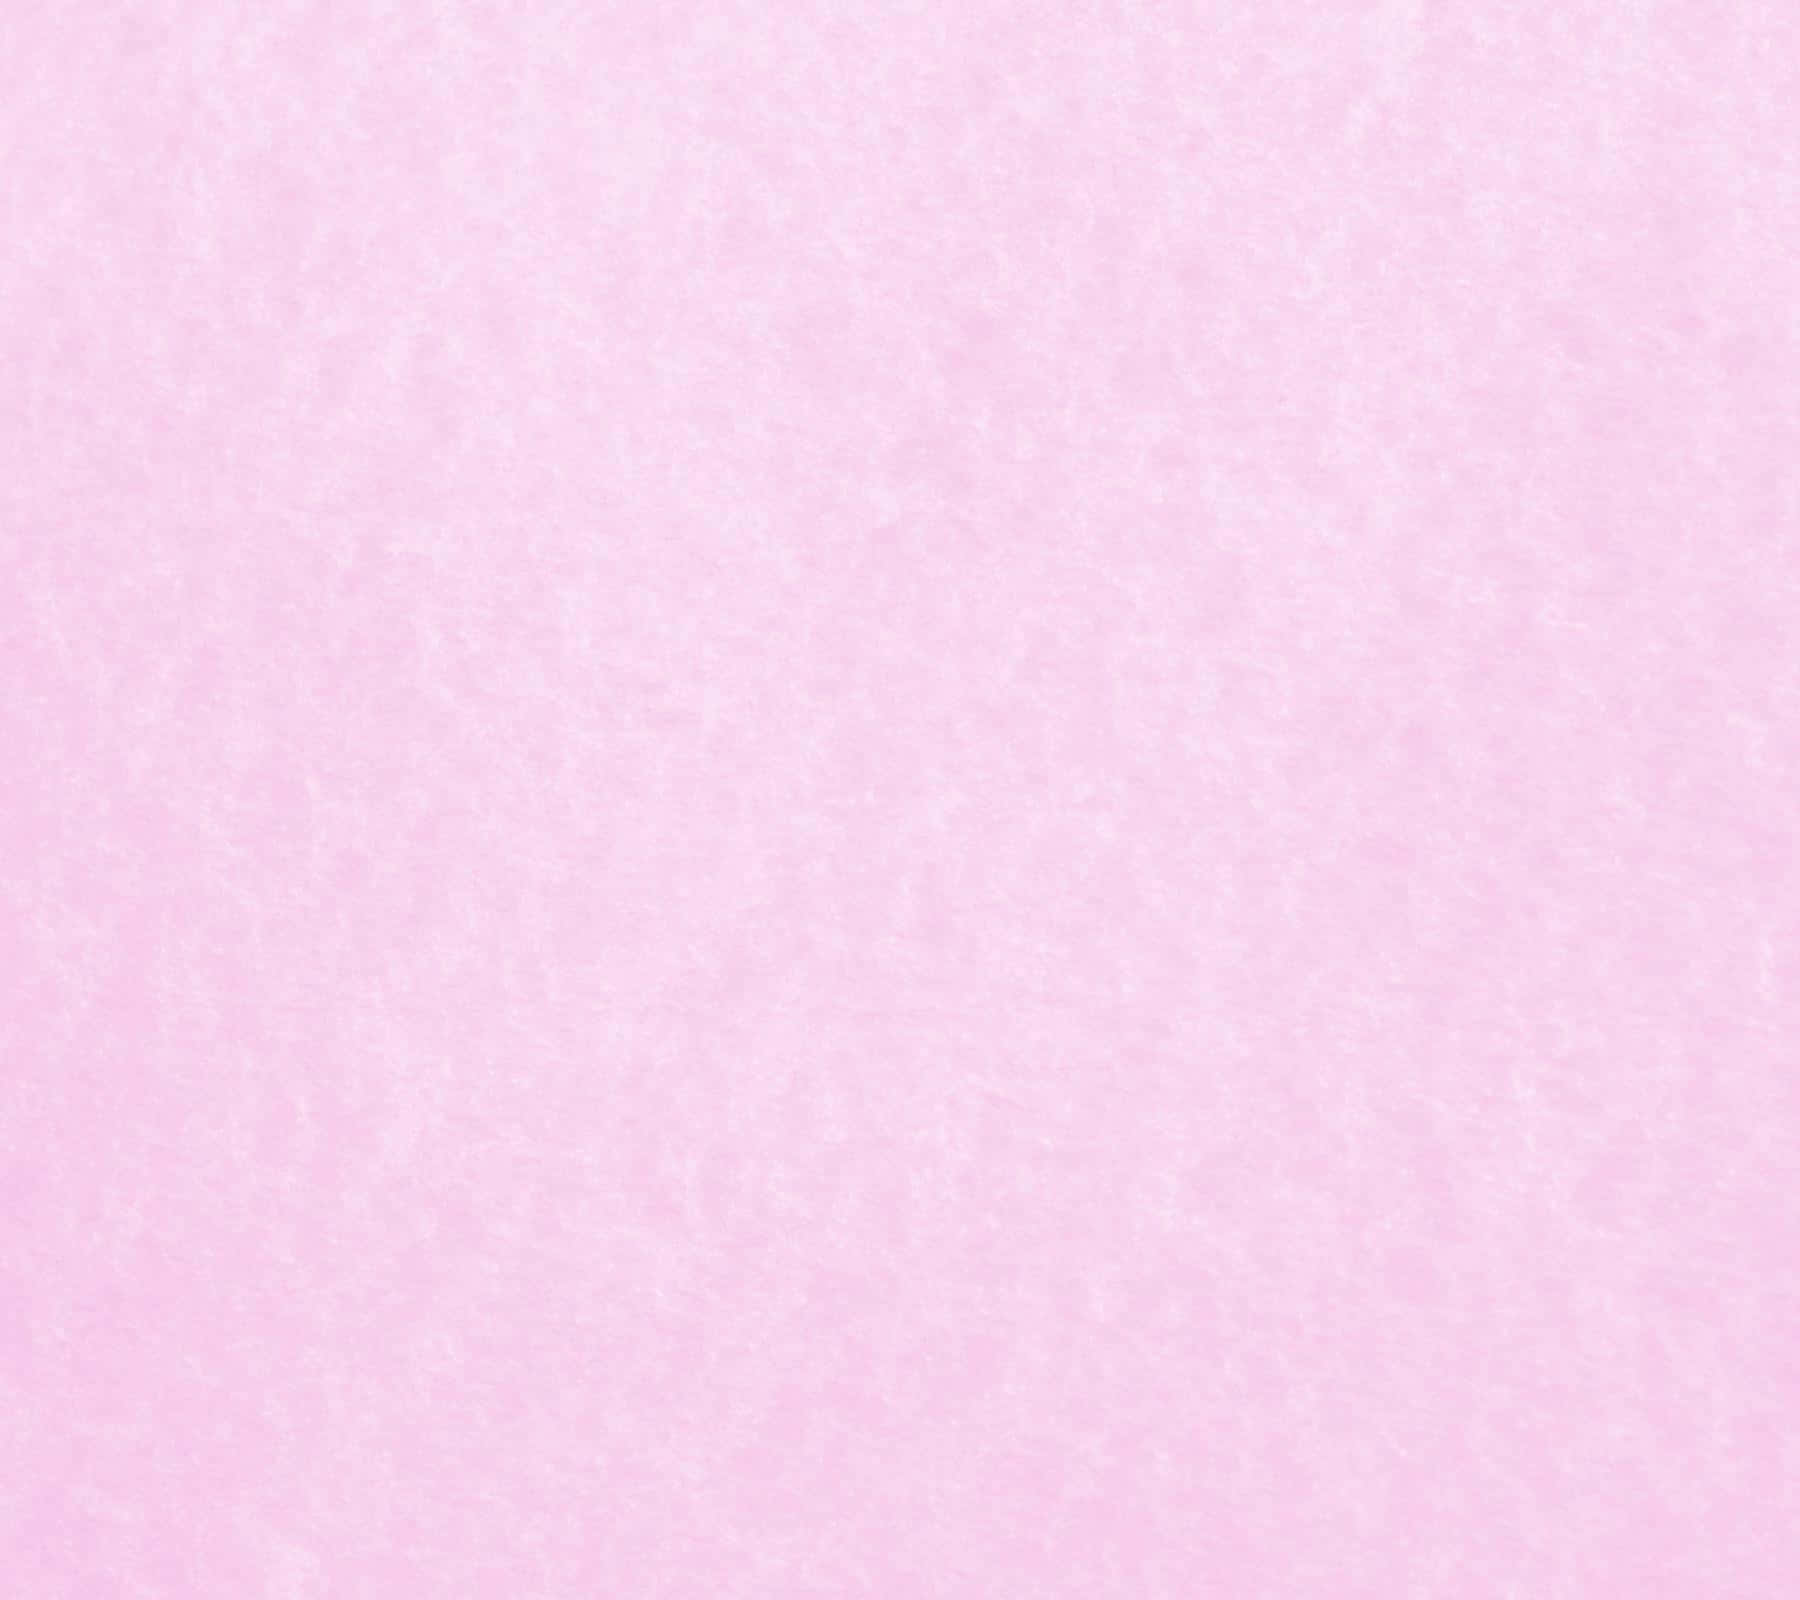 Enjoy the soft warmth of a romantic blush pink background